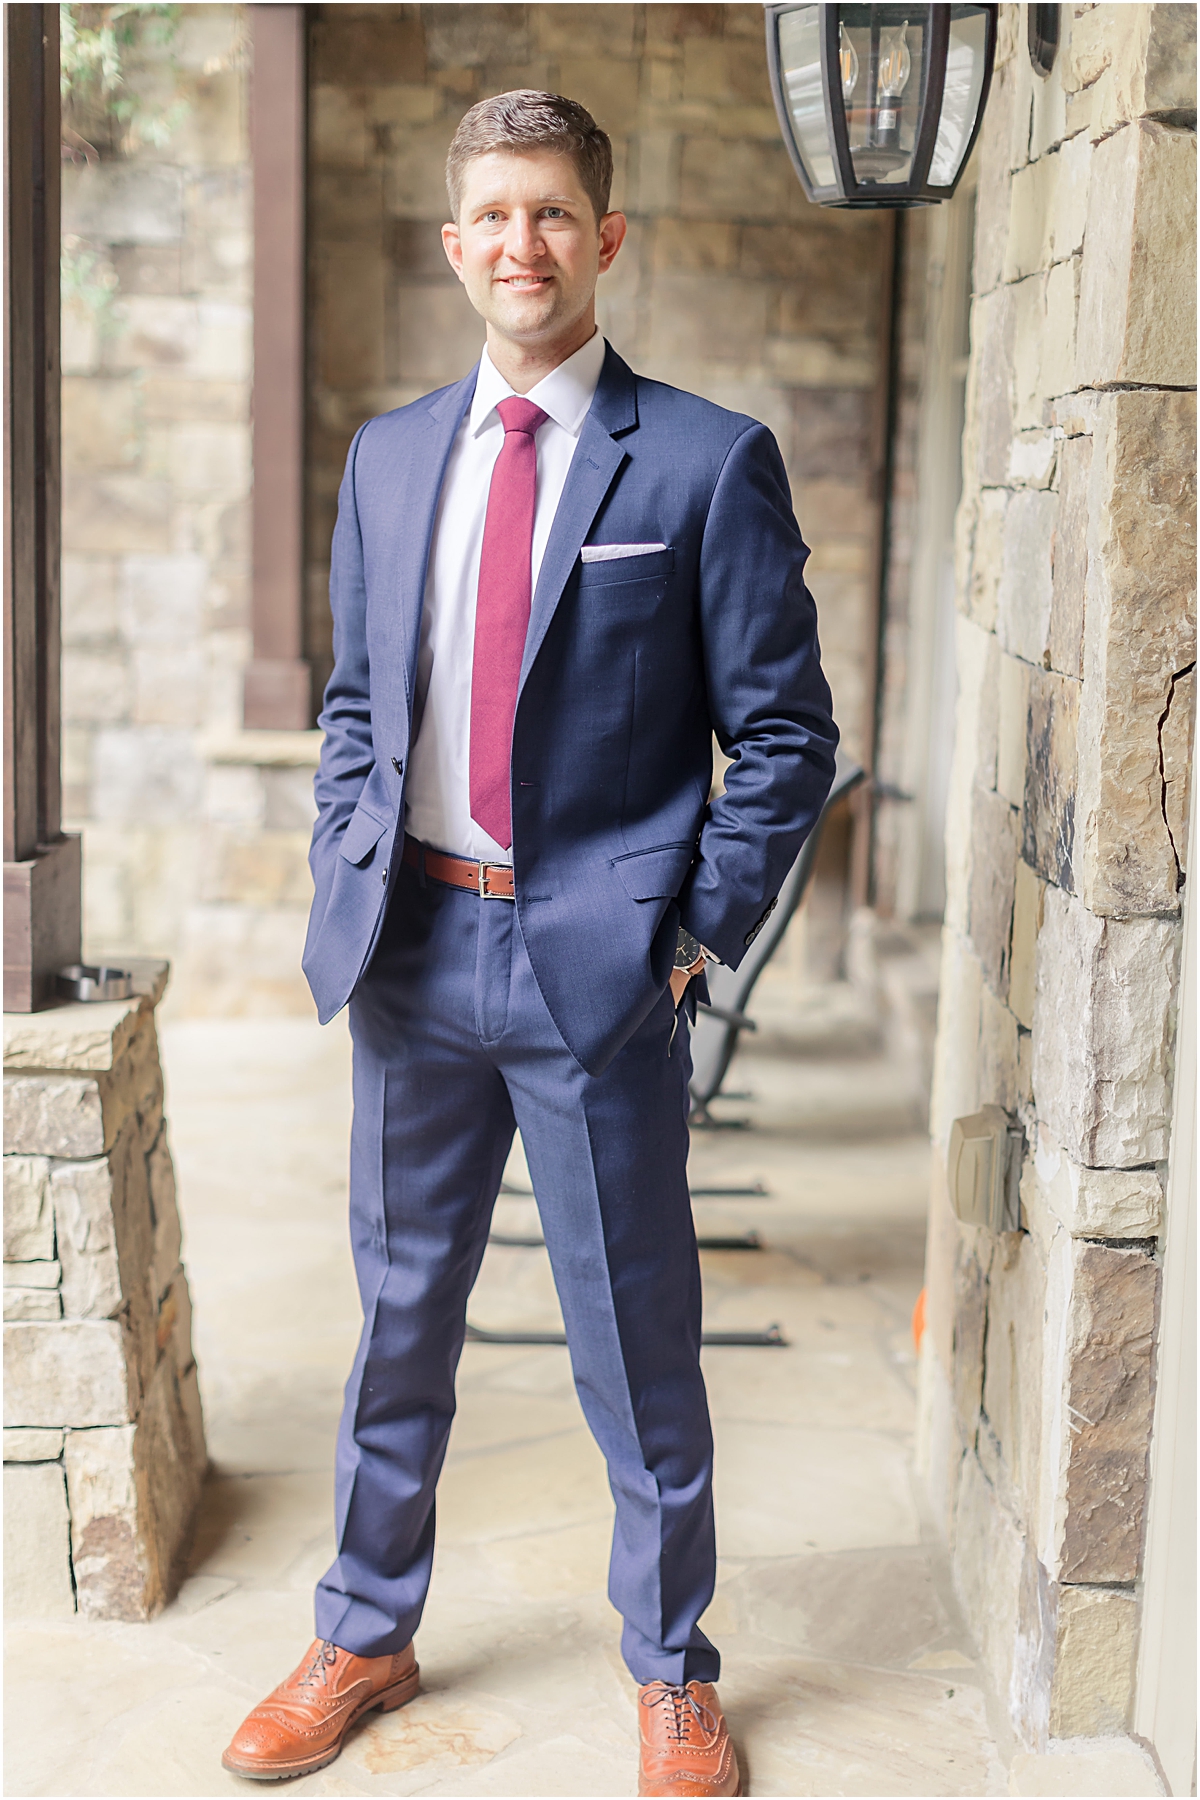 Groom portrait of John on his wedding day at the Foundry at Puritan Mill wearing a navy blue suit with maroon tie and brown dress shoes